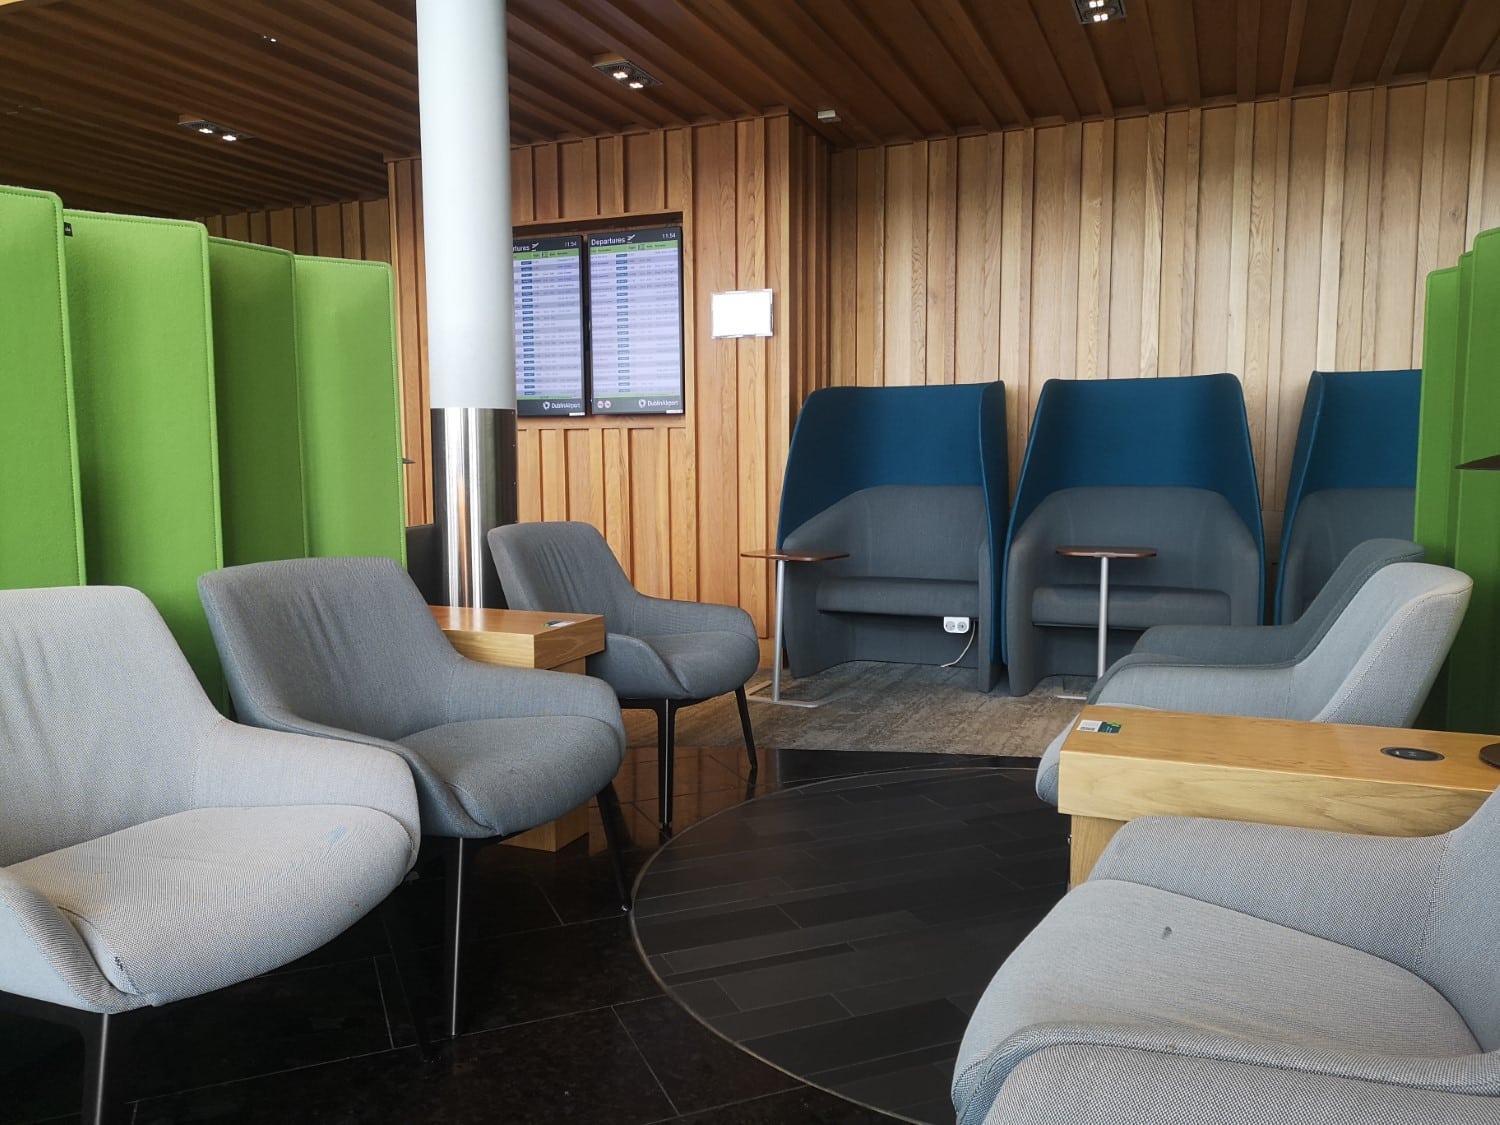 Lounge seating in the 51st & Green airport lounge at Dublin airport.